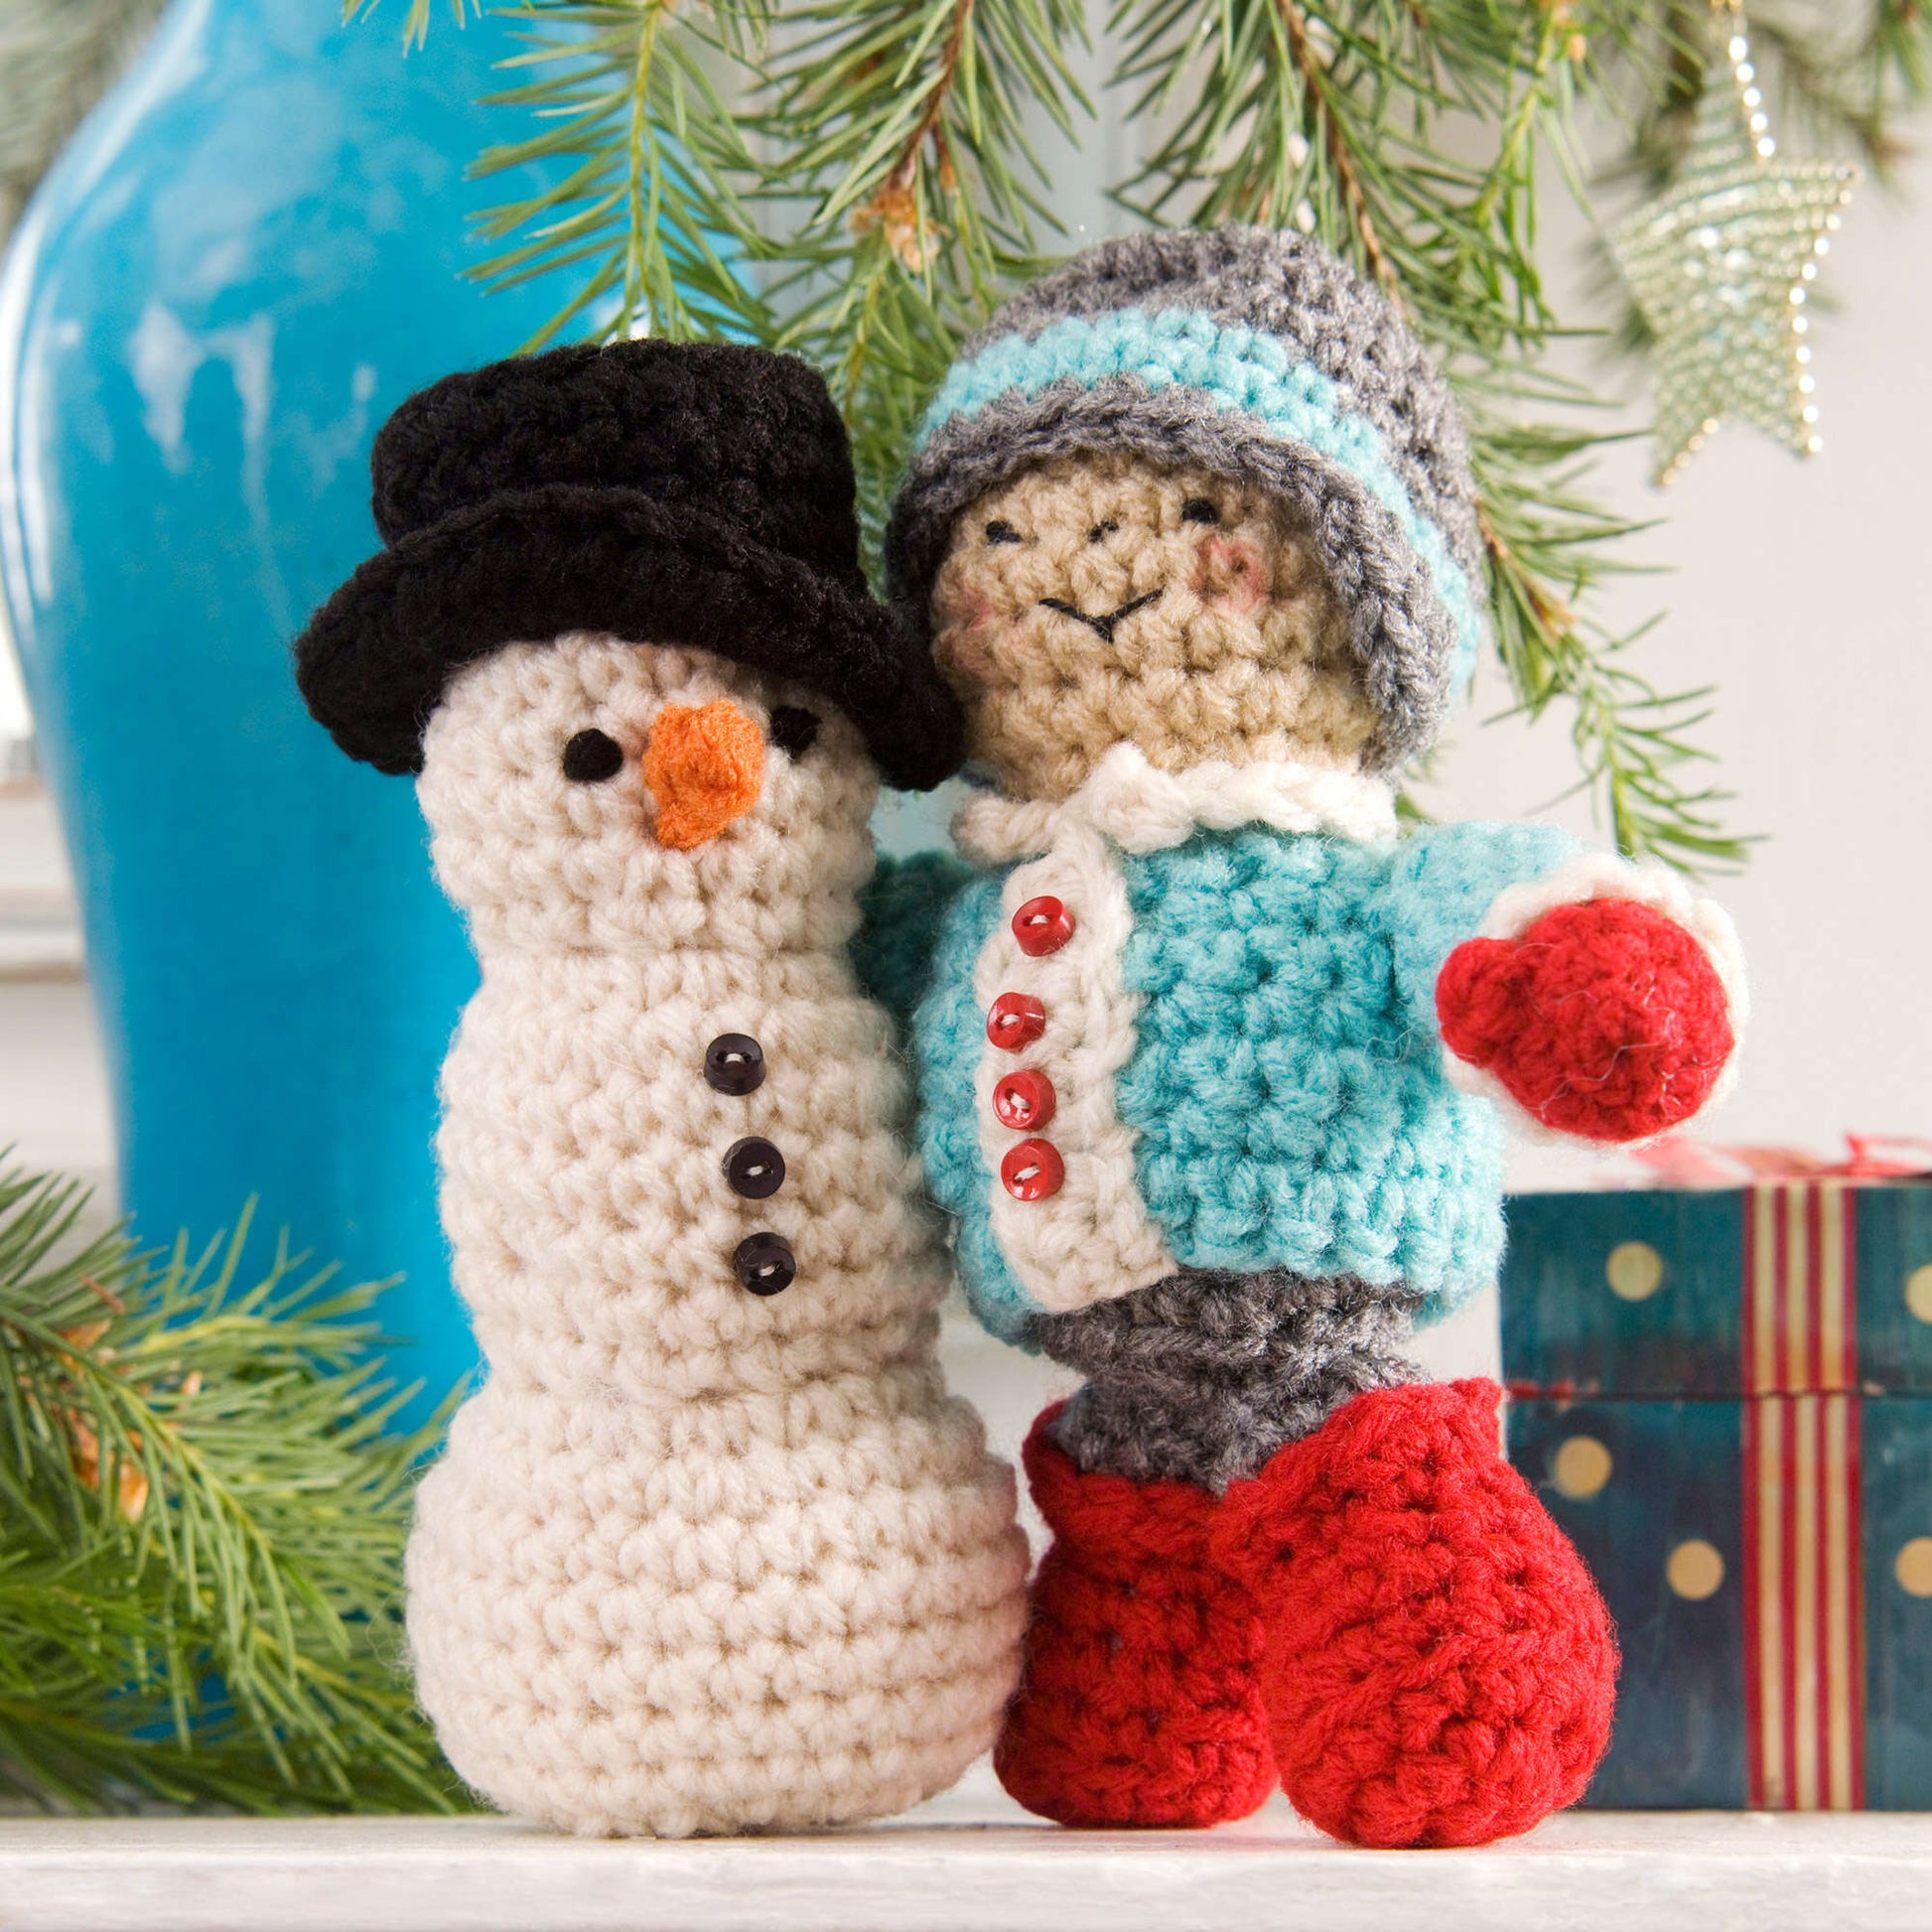 Free Red Heart His First Snowman Crochet Pattern